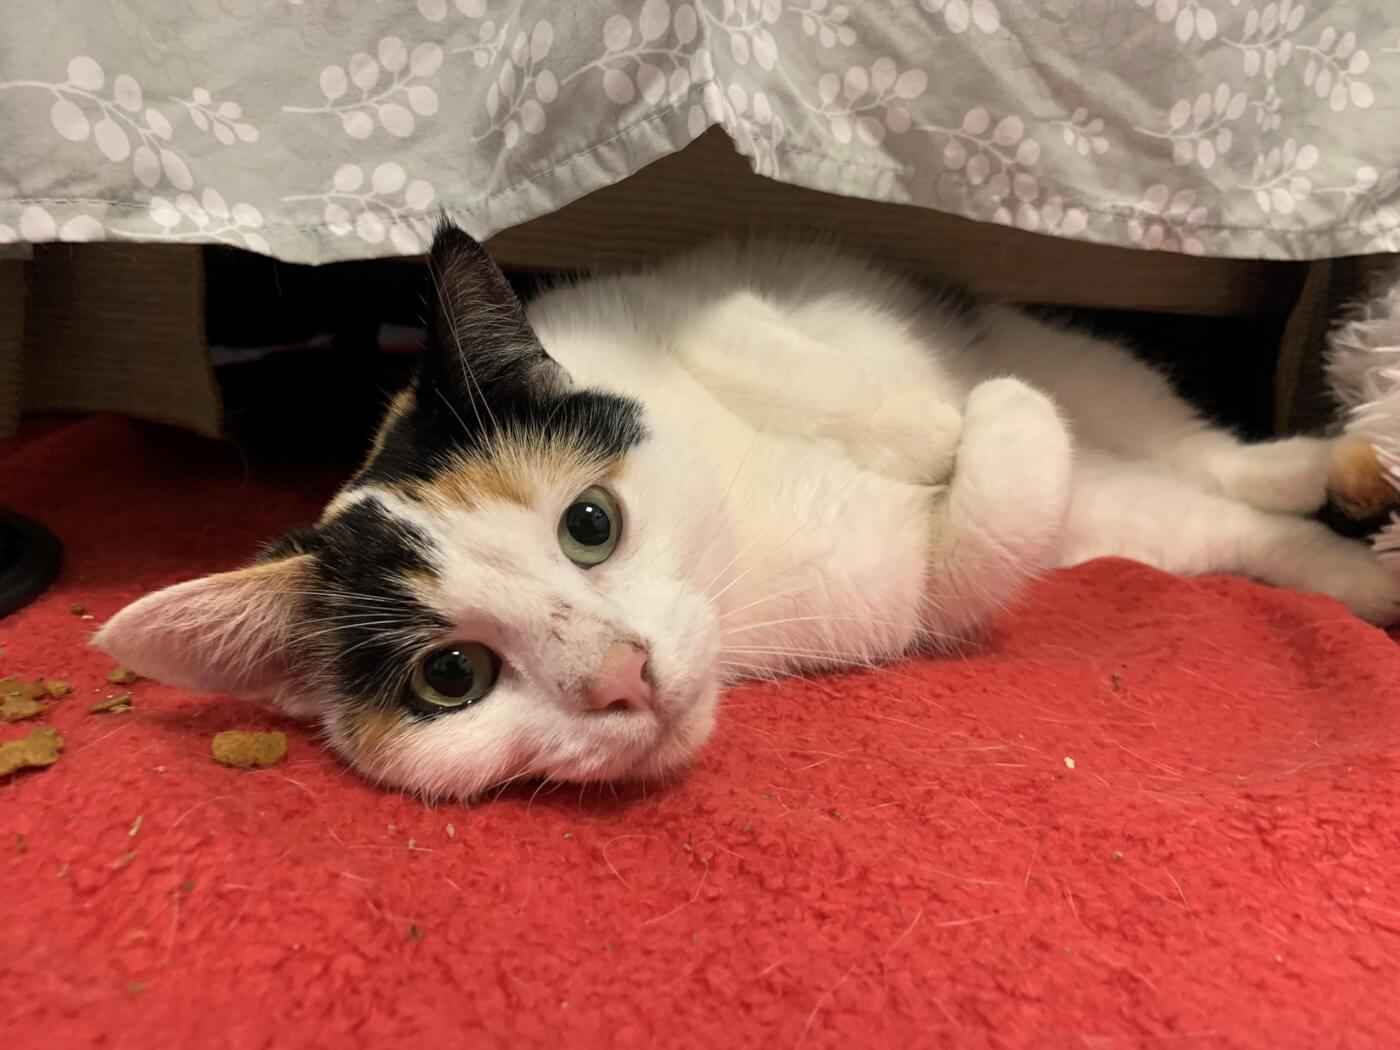 Adoptable cat who is white, golden, and brown calico with green eyes lays on a red blanket. 